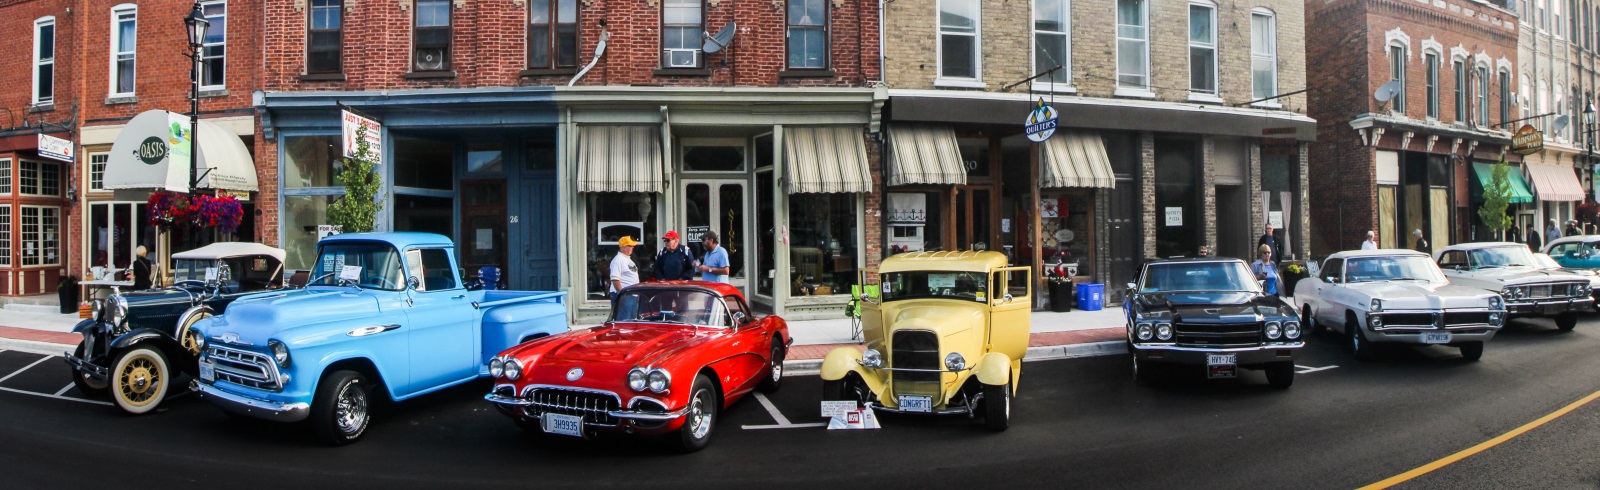 vintage cars lined up in front of stores